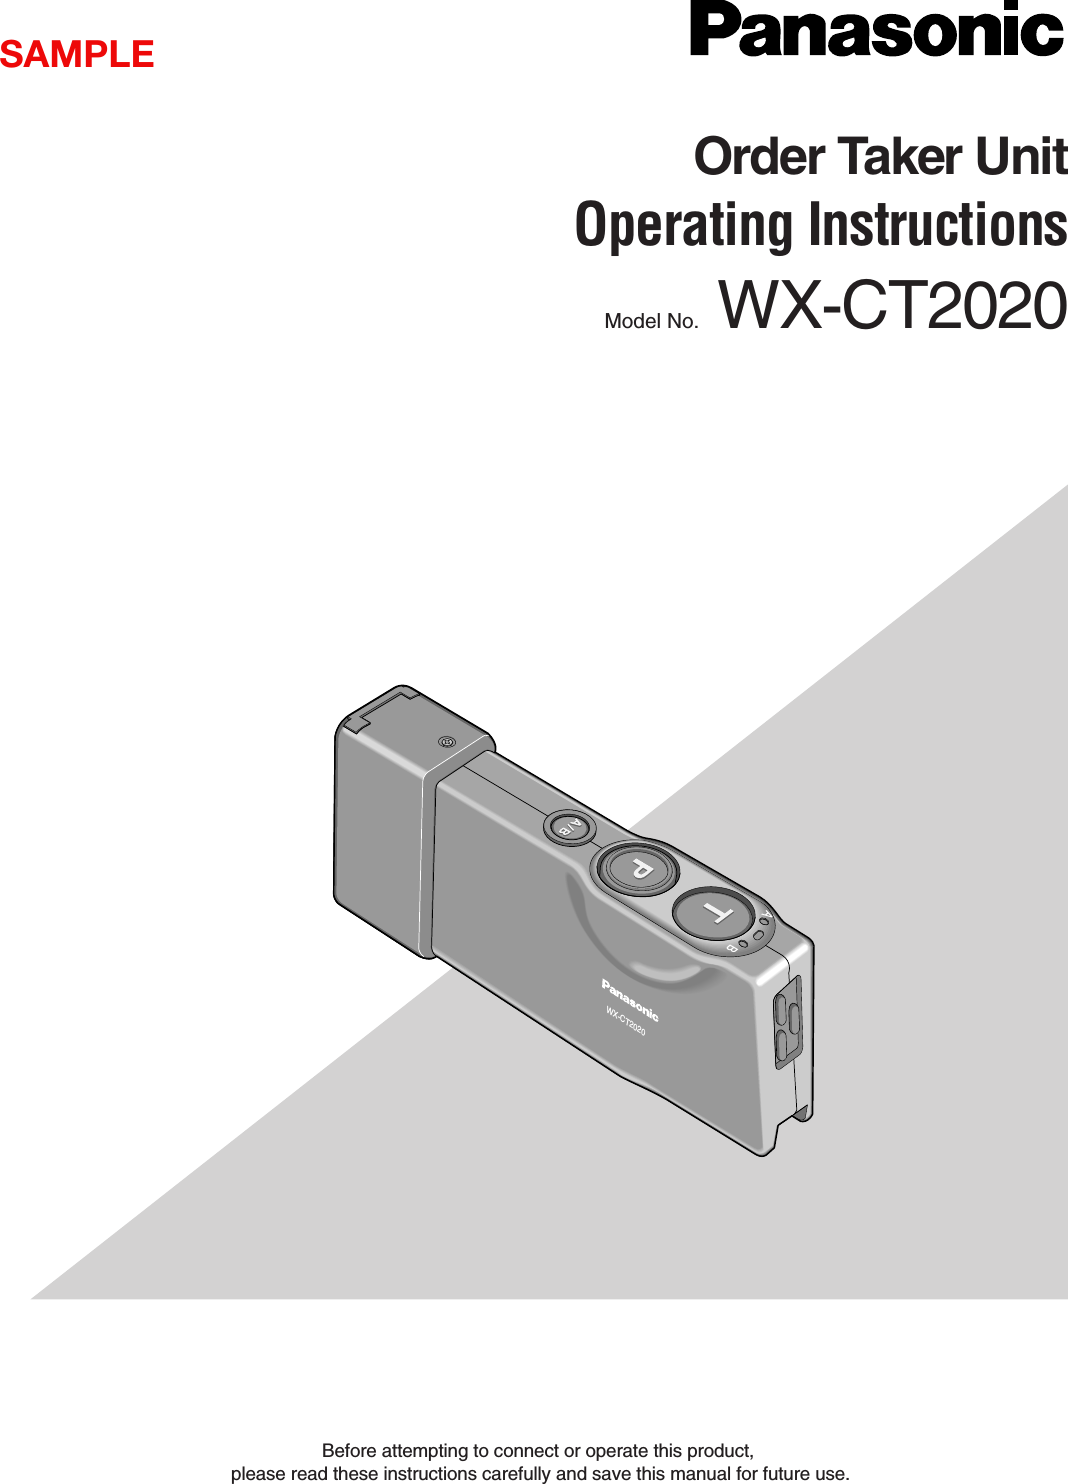 Before attempting to connect or operate this product,please read these instructions carefully and save this manual for future use.Order Taker UnitOperating InstructionsModel No. WX-CT2020ABWX-CT2020SAMPLE